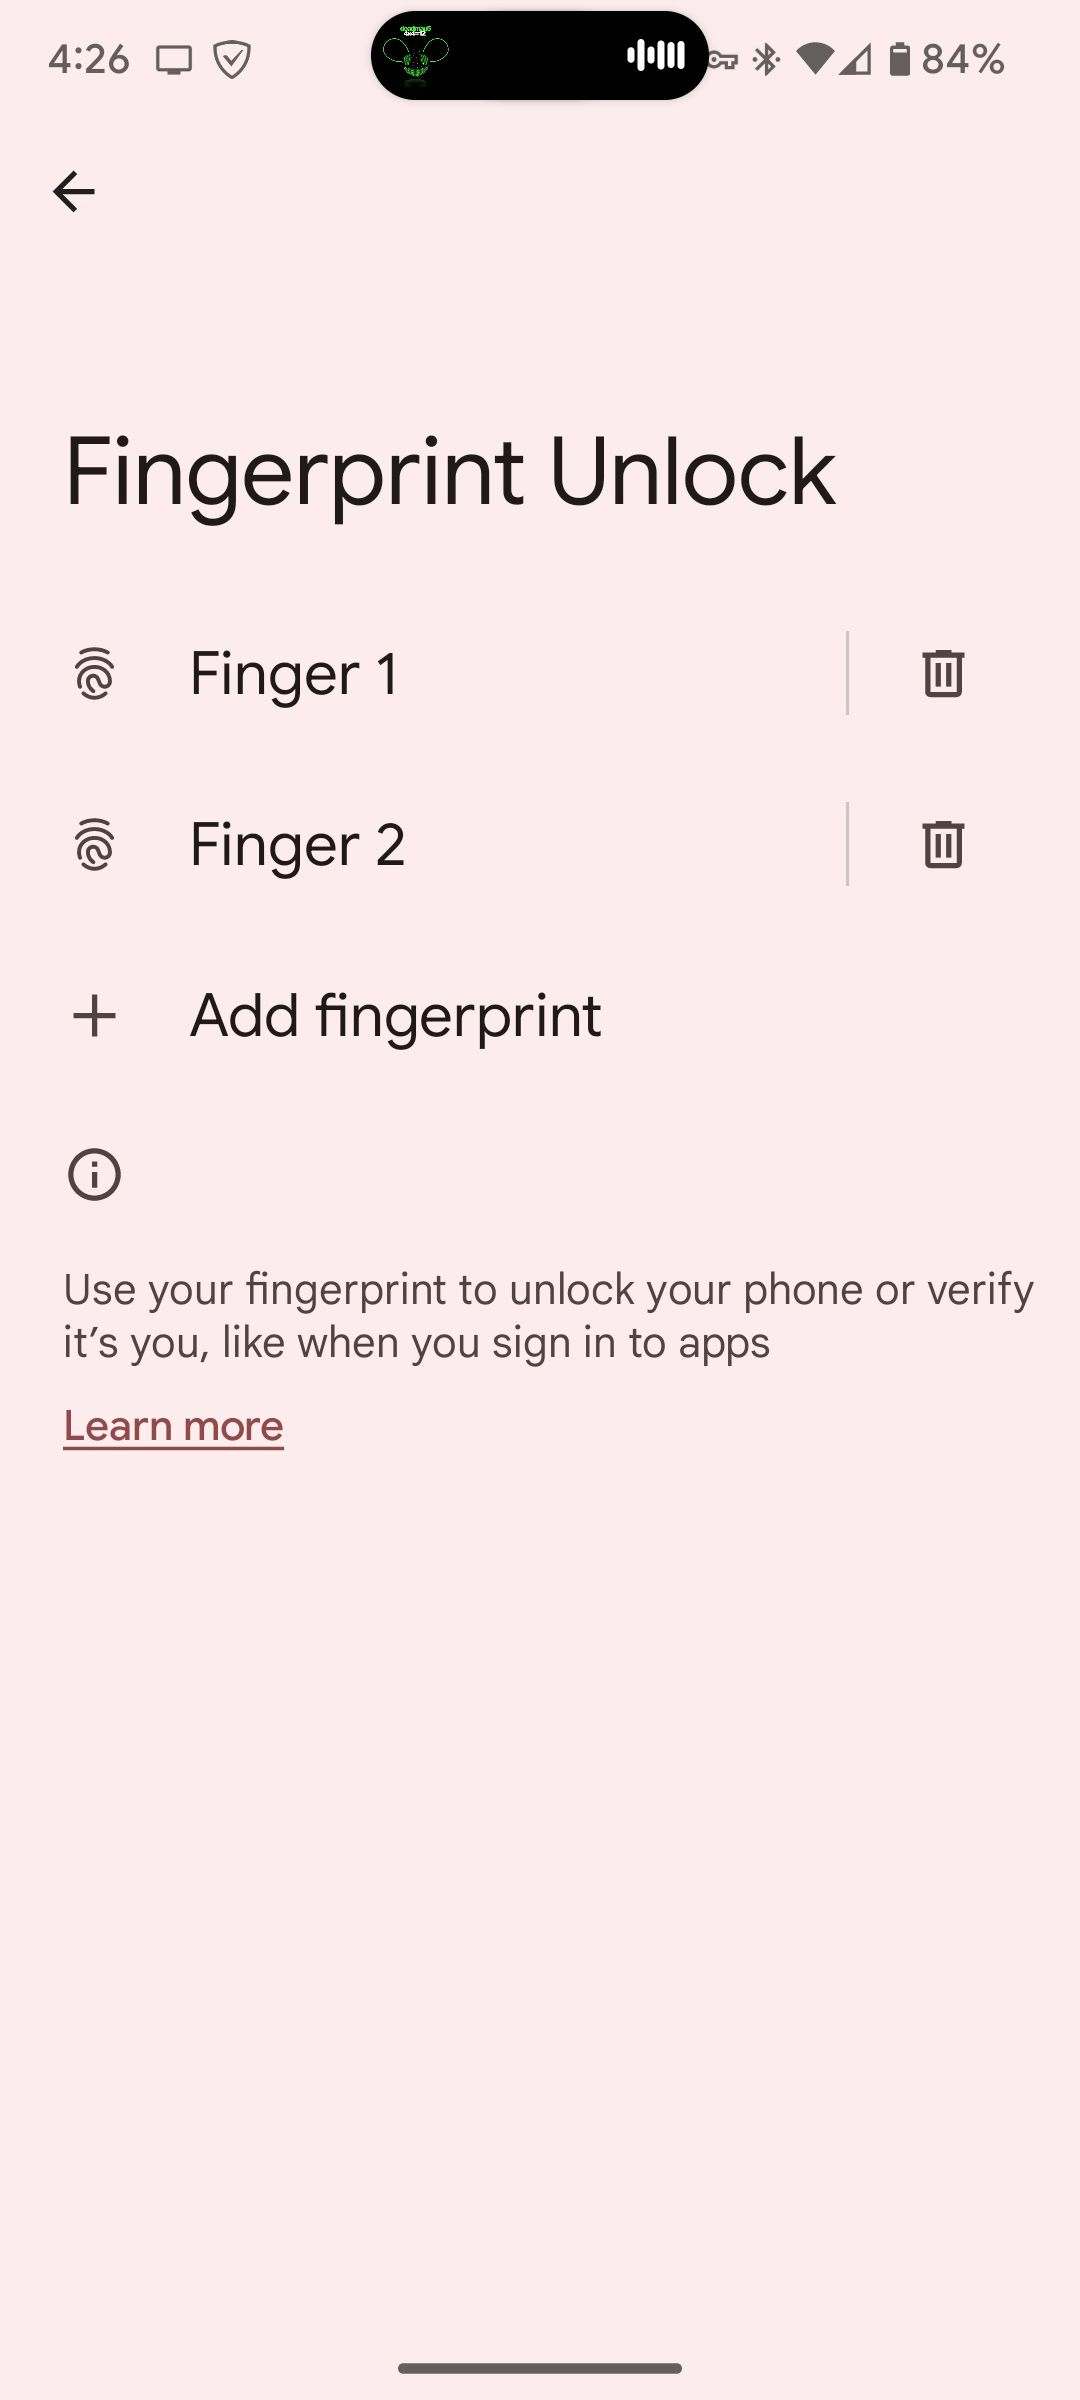 The fingerprint unlock page on Android